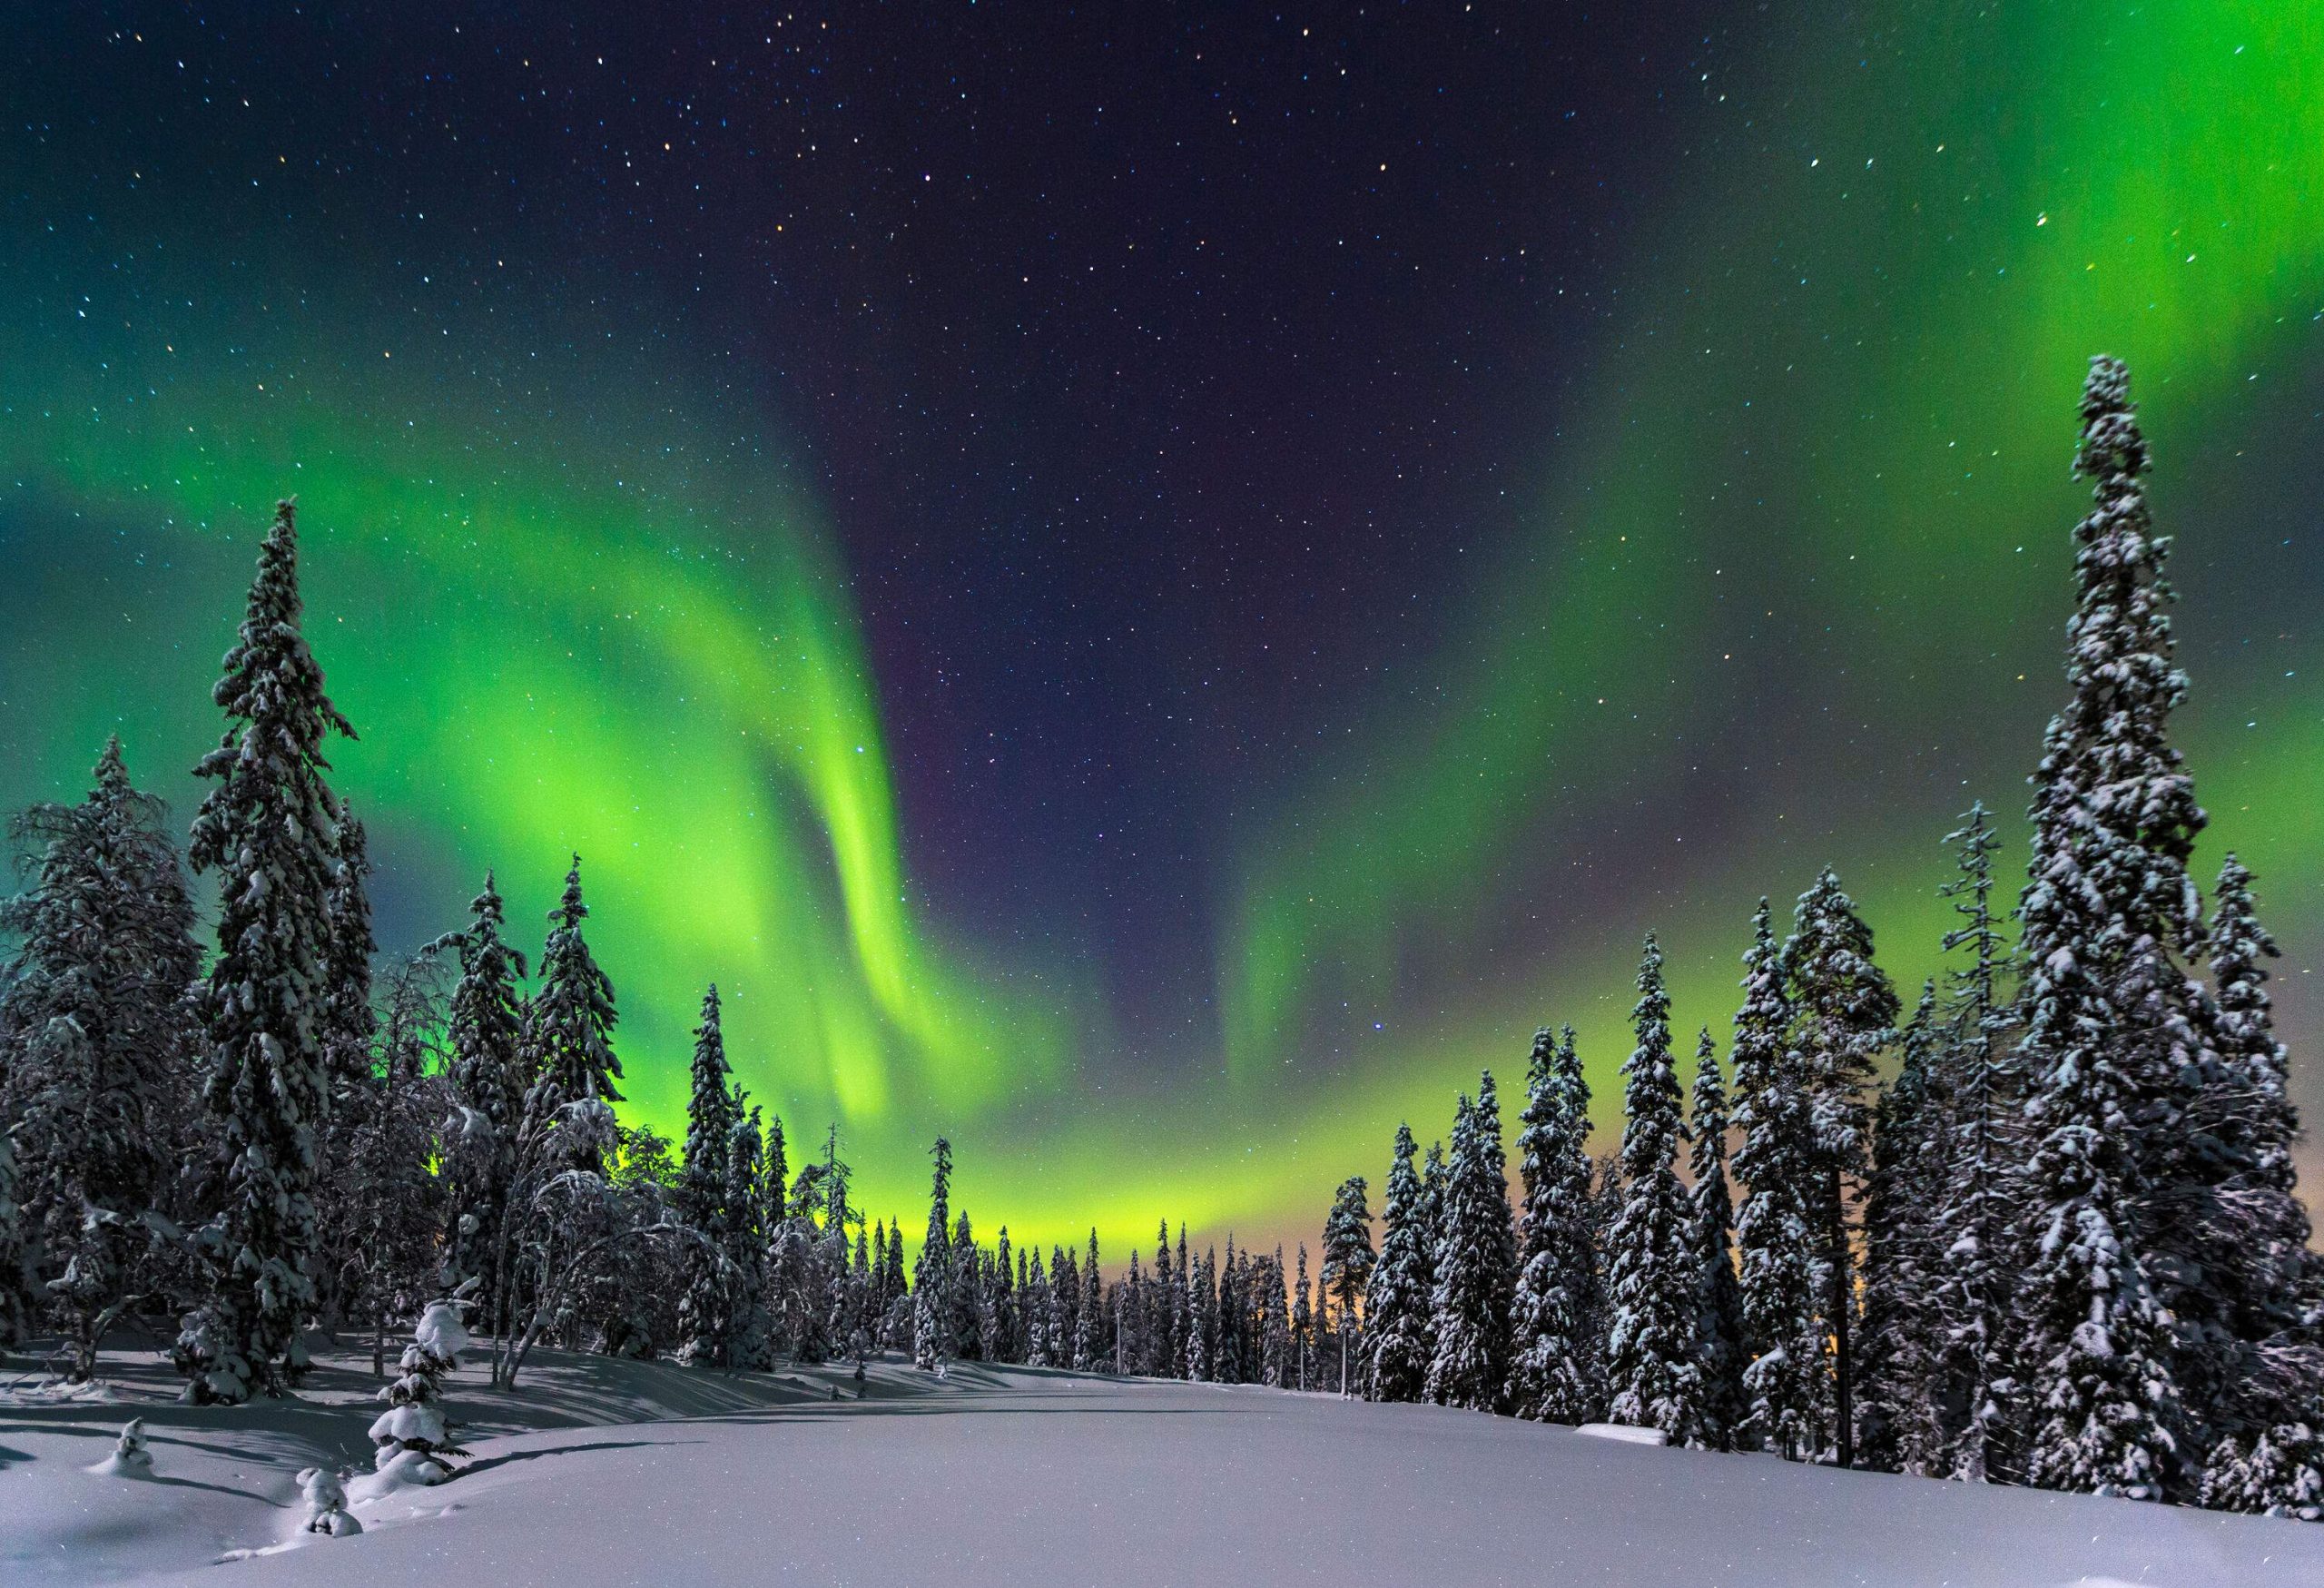 A snowfield on a frosted forest under the vivid green hues of the northern lights.